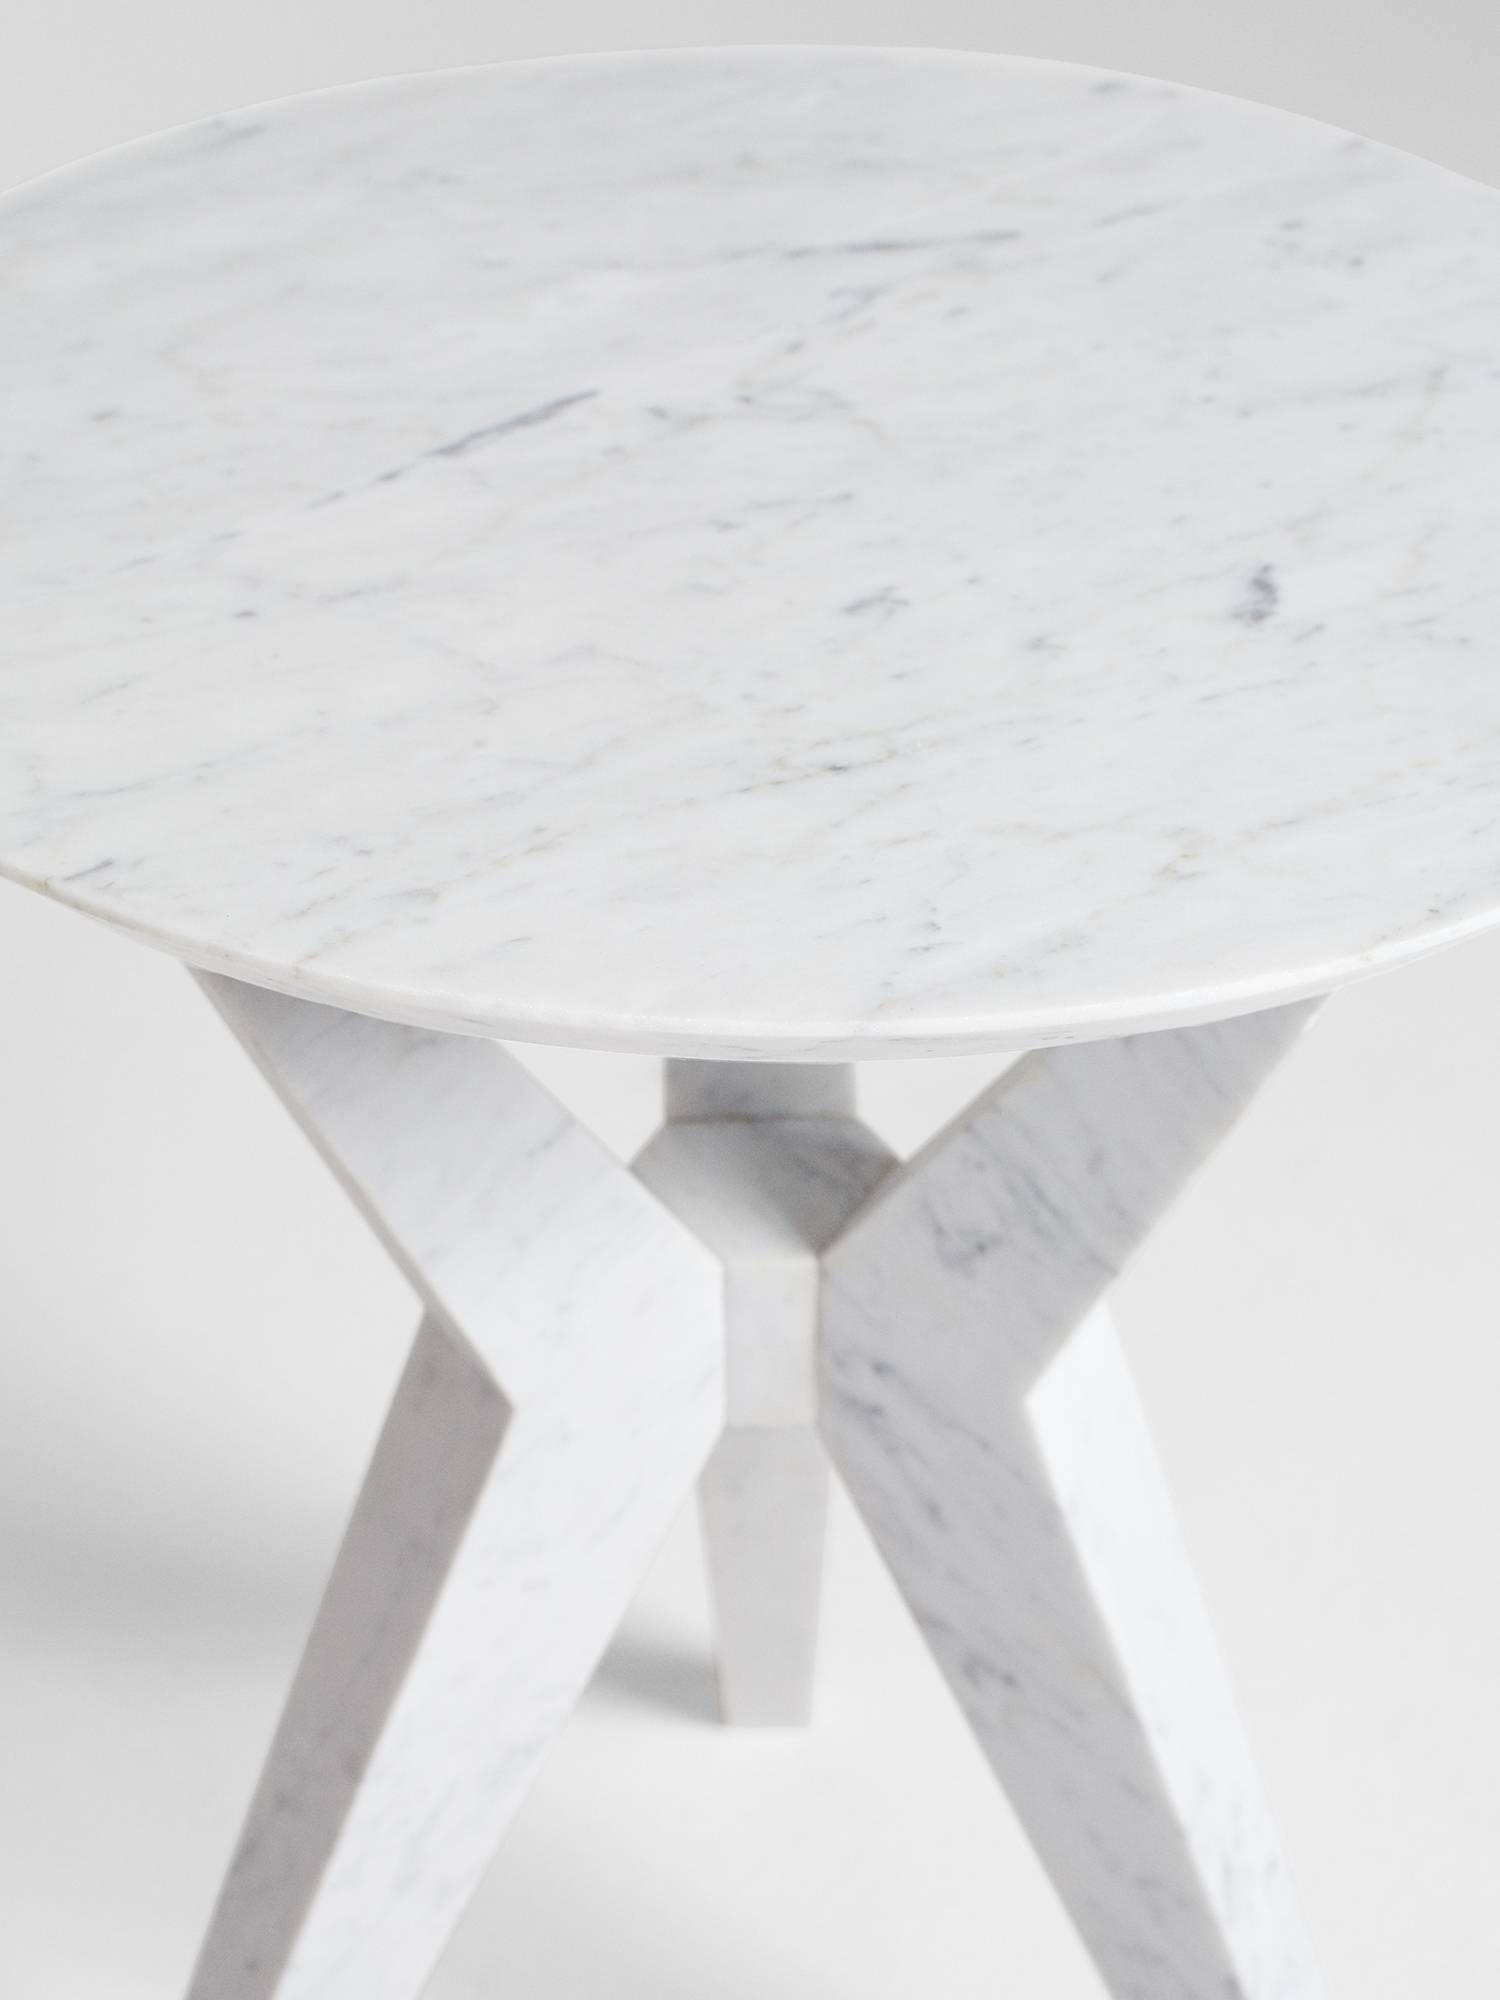 Hand-sculpted by Los-Angeles based master stone carver, Nathan Hunt, the Tripod Side Table is made entirely from Carrara marble.

Perfect as a side table the Tripod Table can also be used as an end table. As it is hand-carved by the designer /